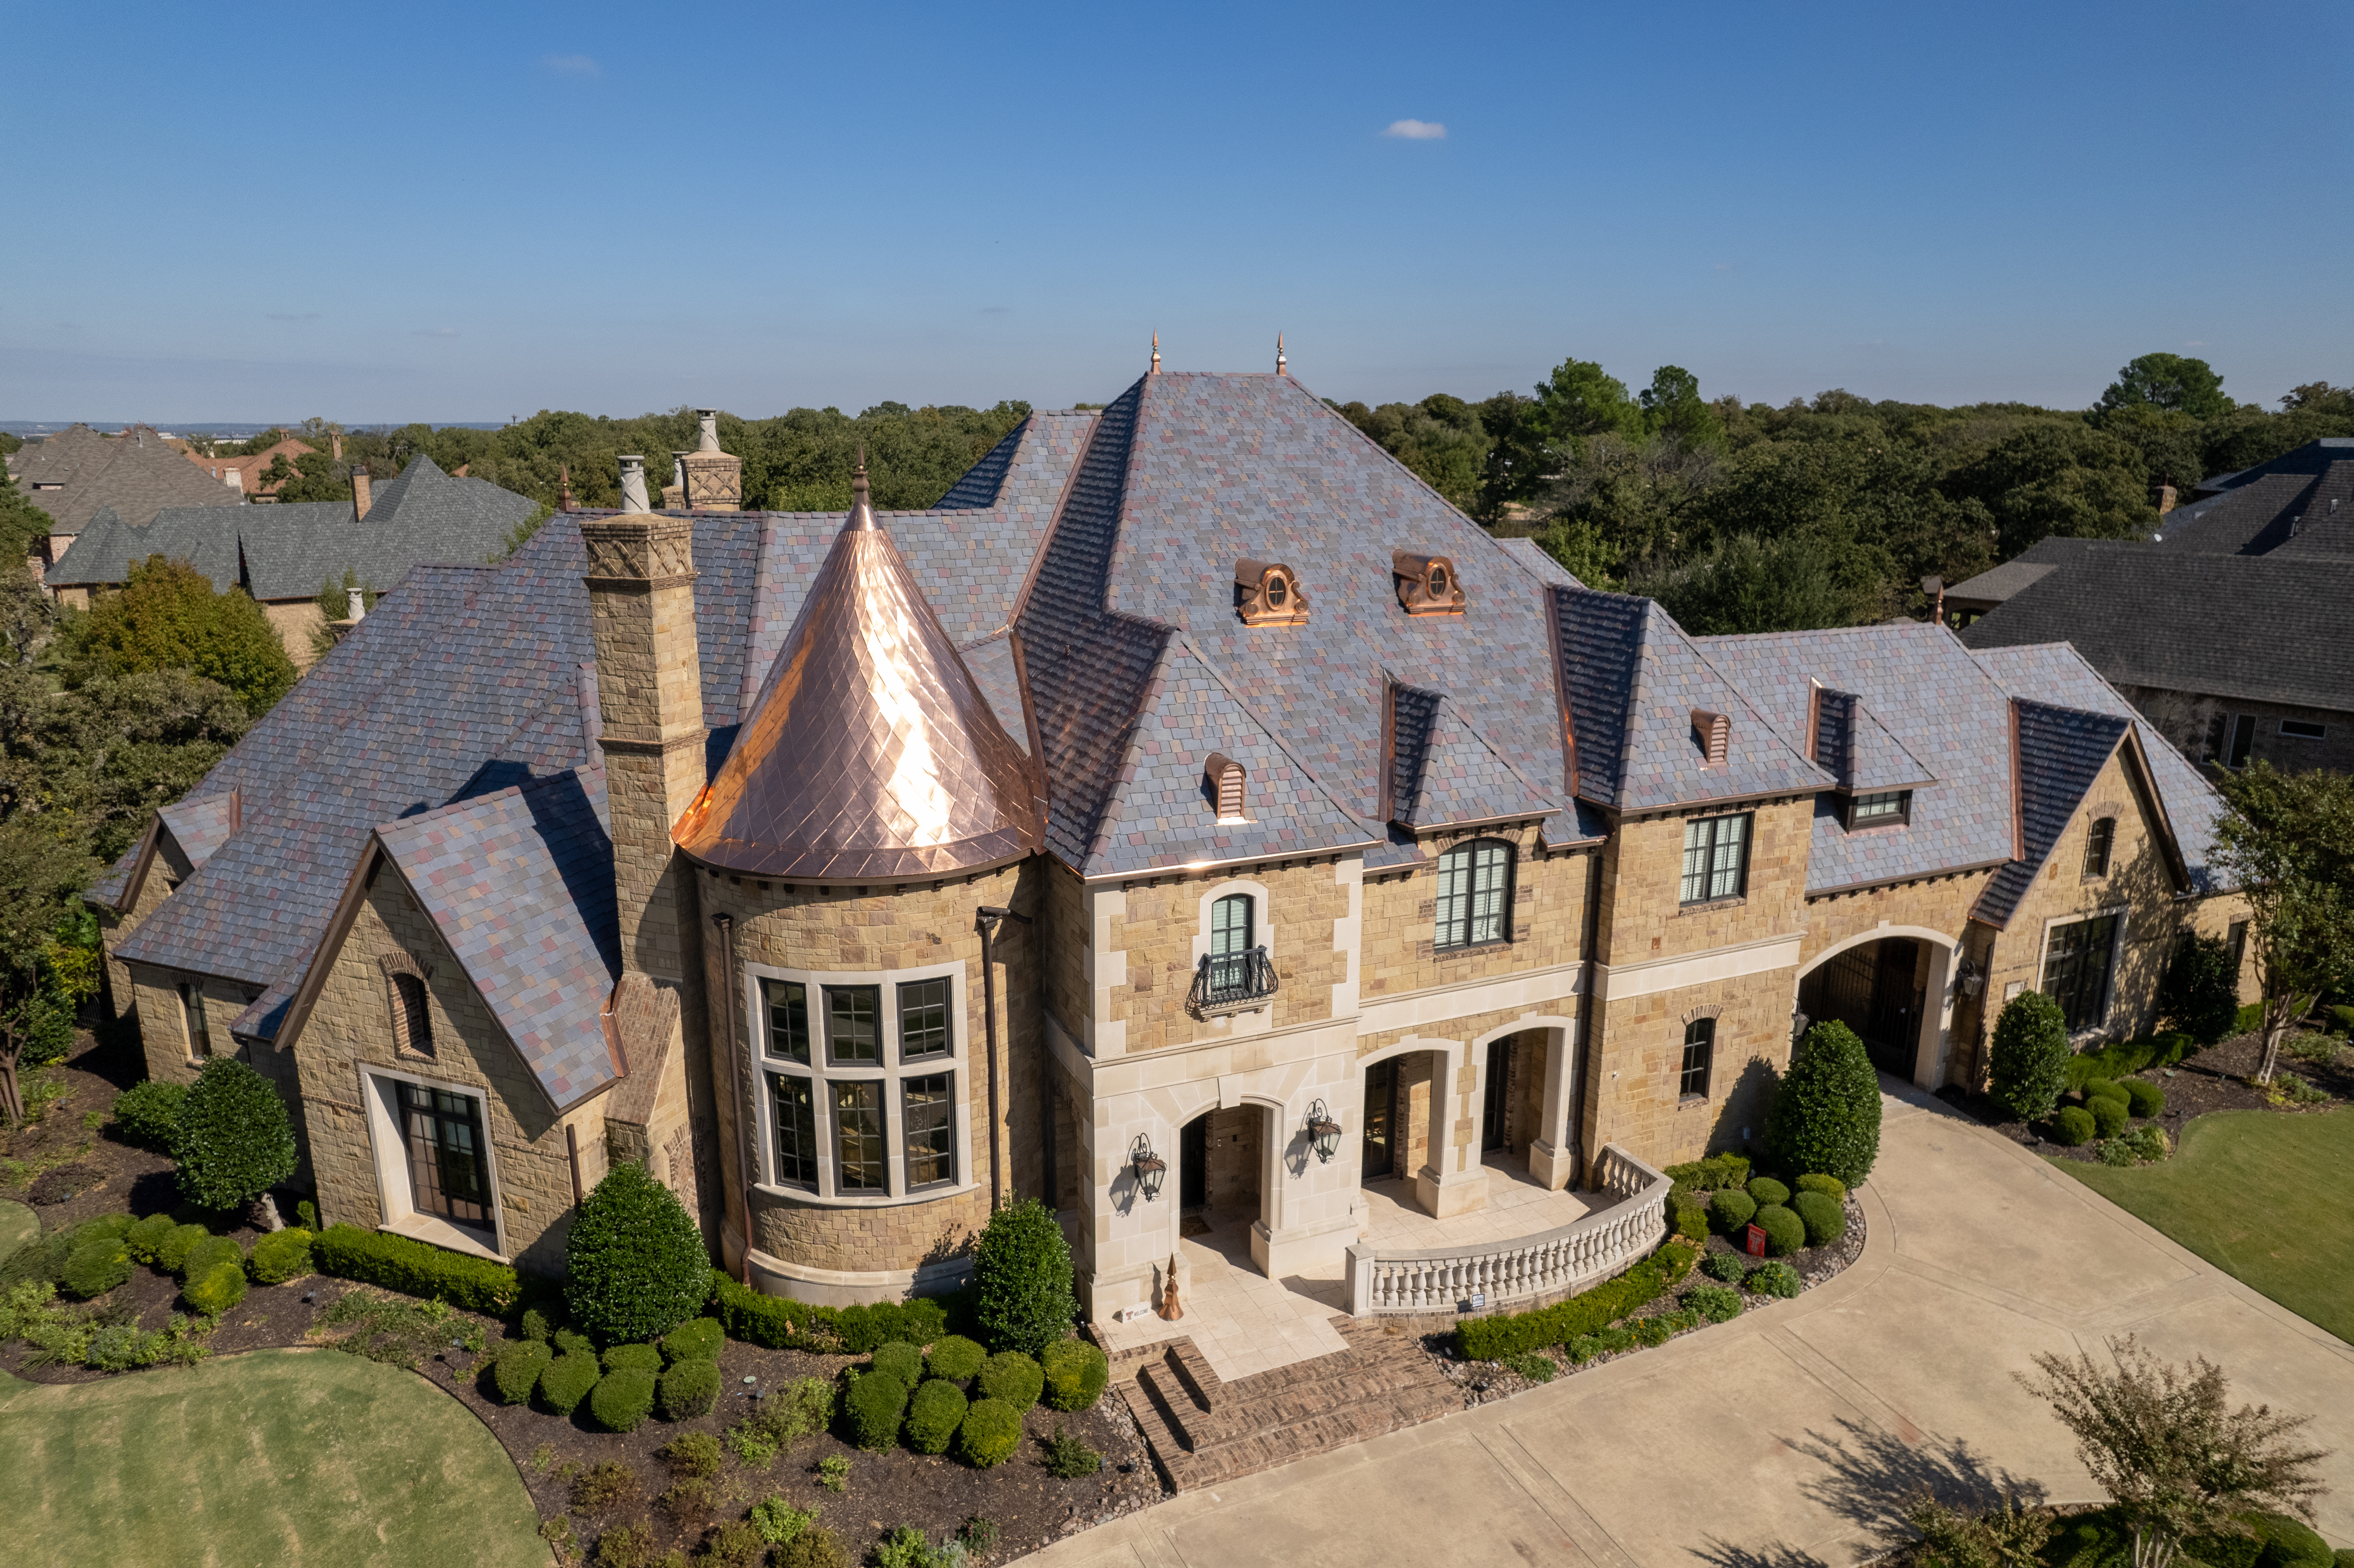 Precision Construction and Roofing of North Richland Hills, Texas